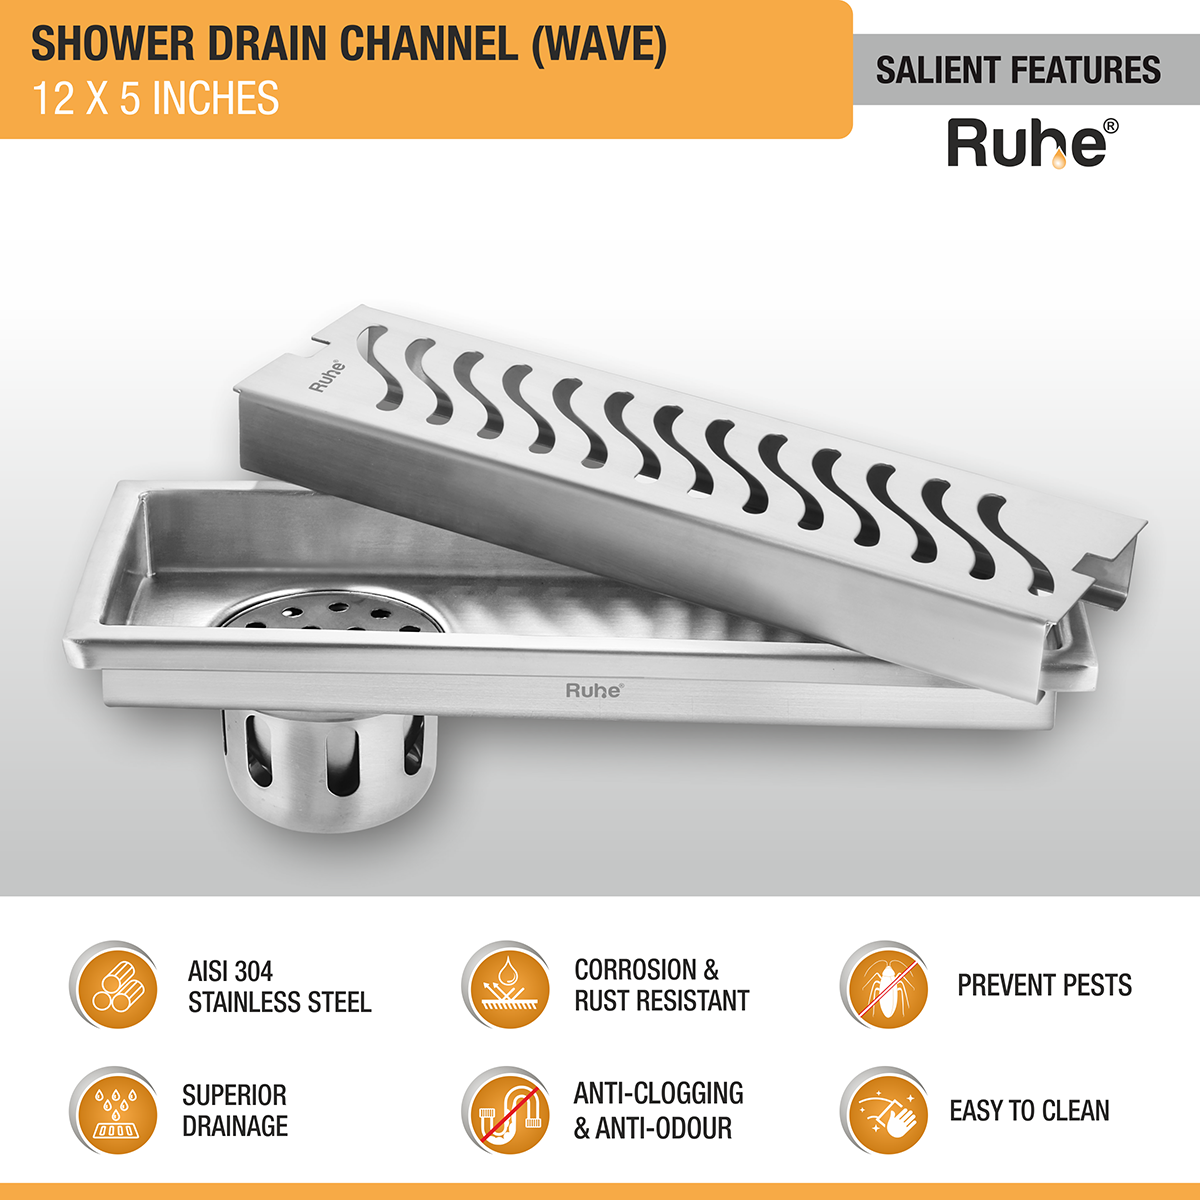 Wave Shower Drain Channel (12 X 5 Inches) with Cockroach Trap (304 Grade) features